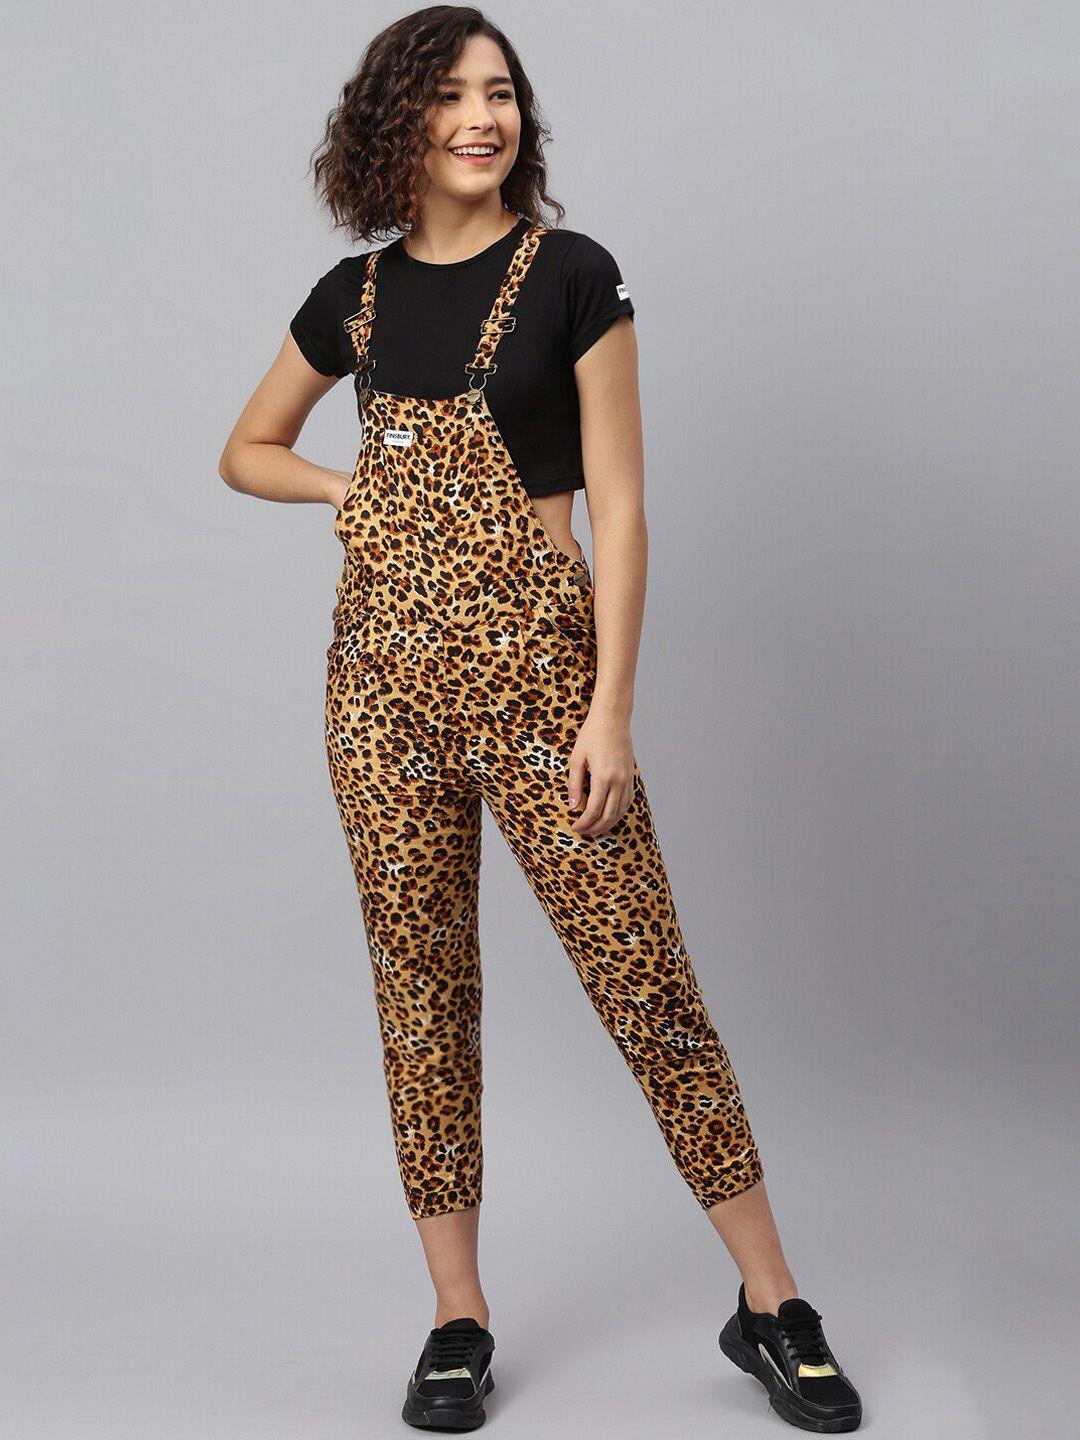 finsbury london women leopard printed straight leg cotton dungaree with t-shirt